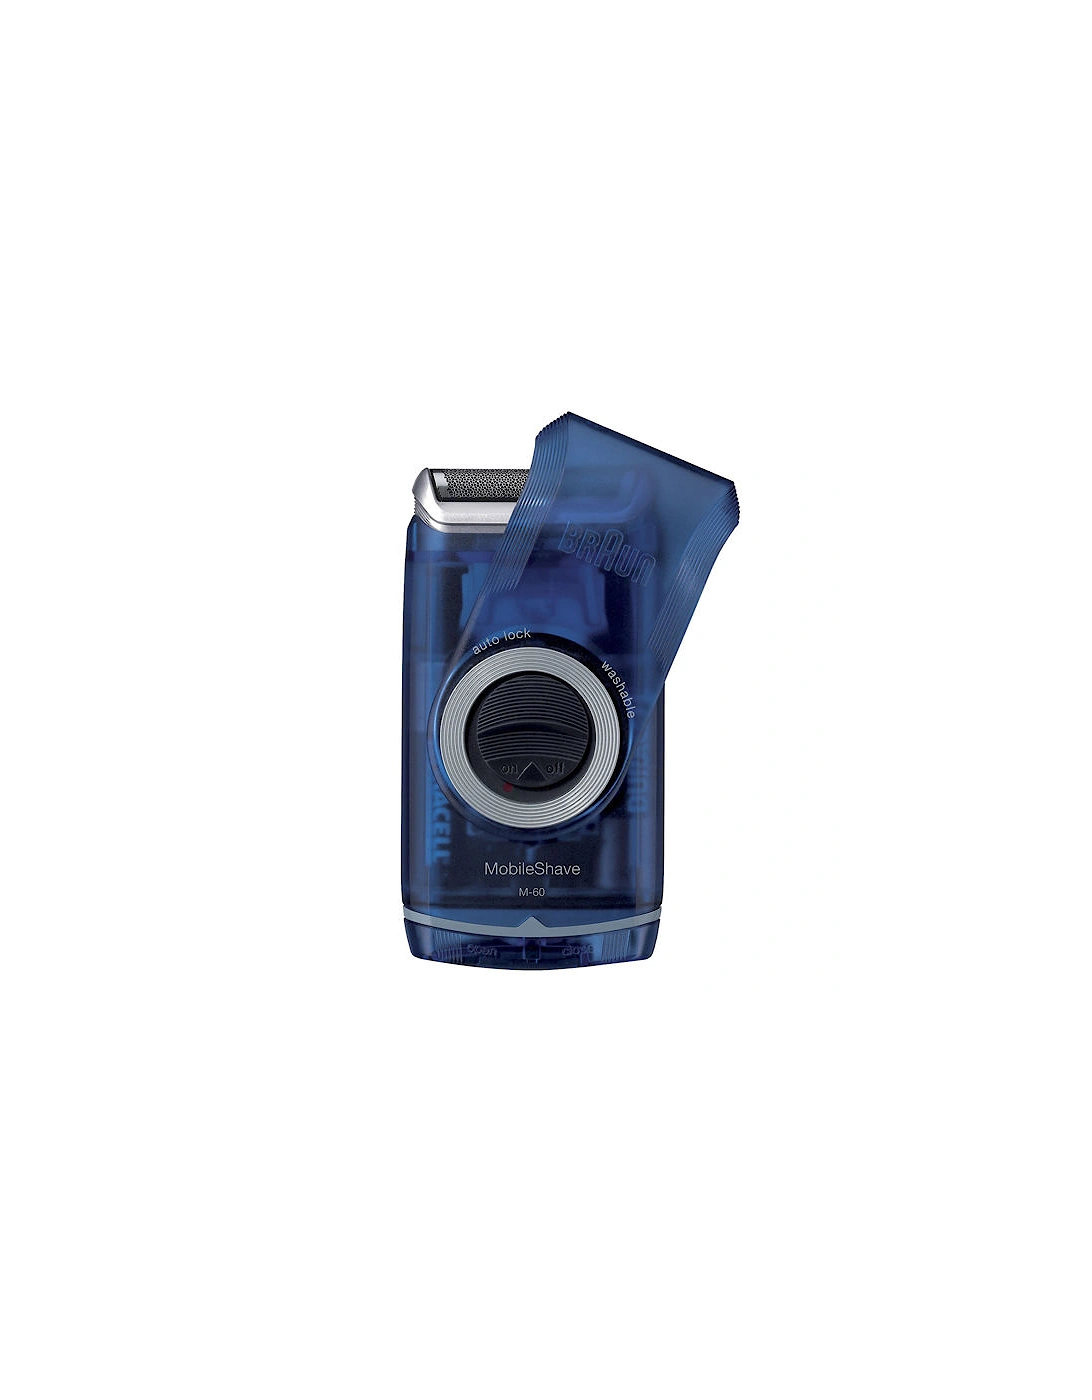 Pocket Go Shaver M60b - - Pocket Go Shaver M60b - Feiras, 2 of 1